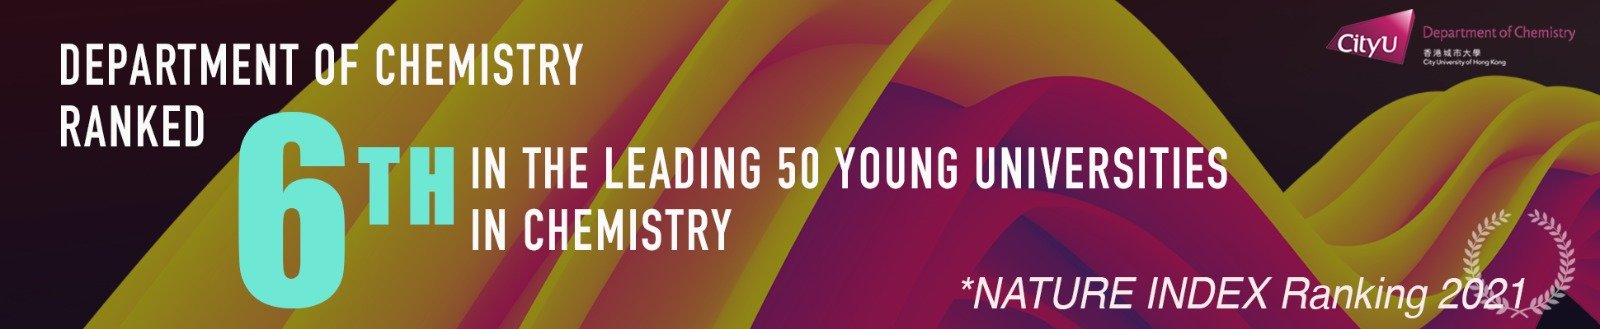 CityU CHEM is ranked the 6th among the 50 leading young universities in the world